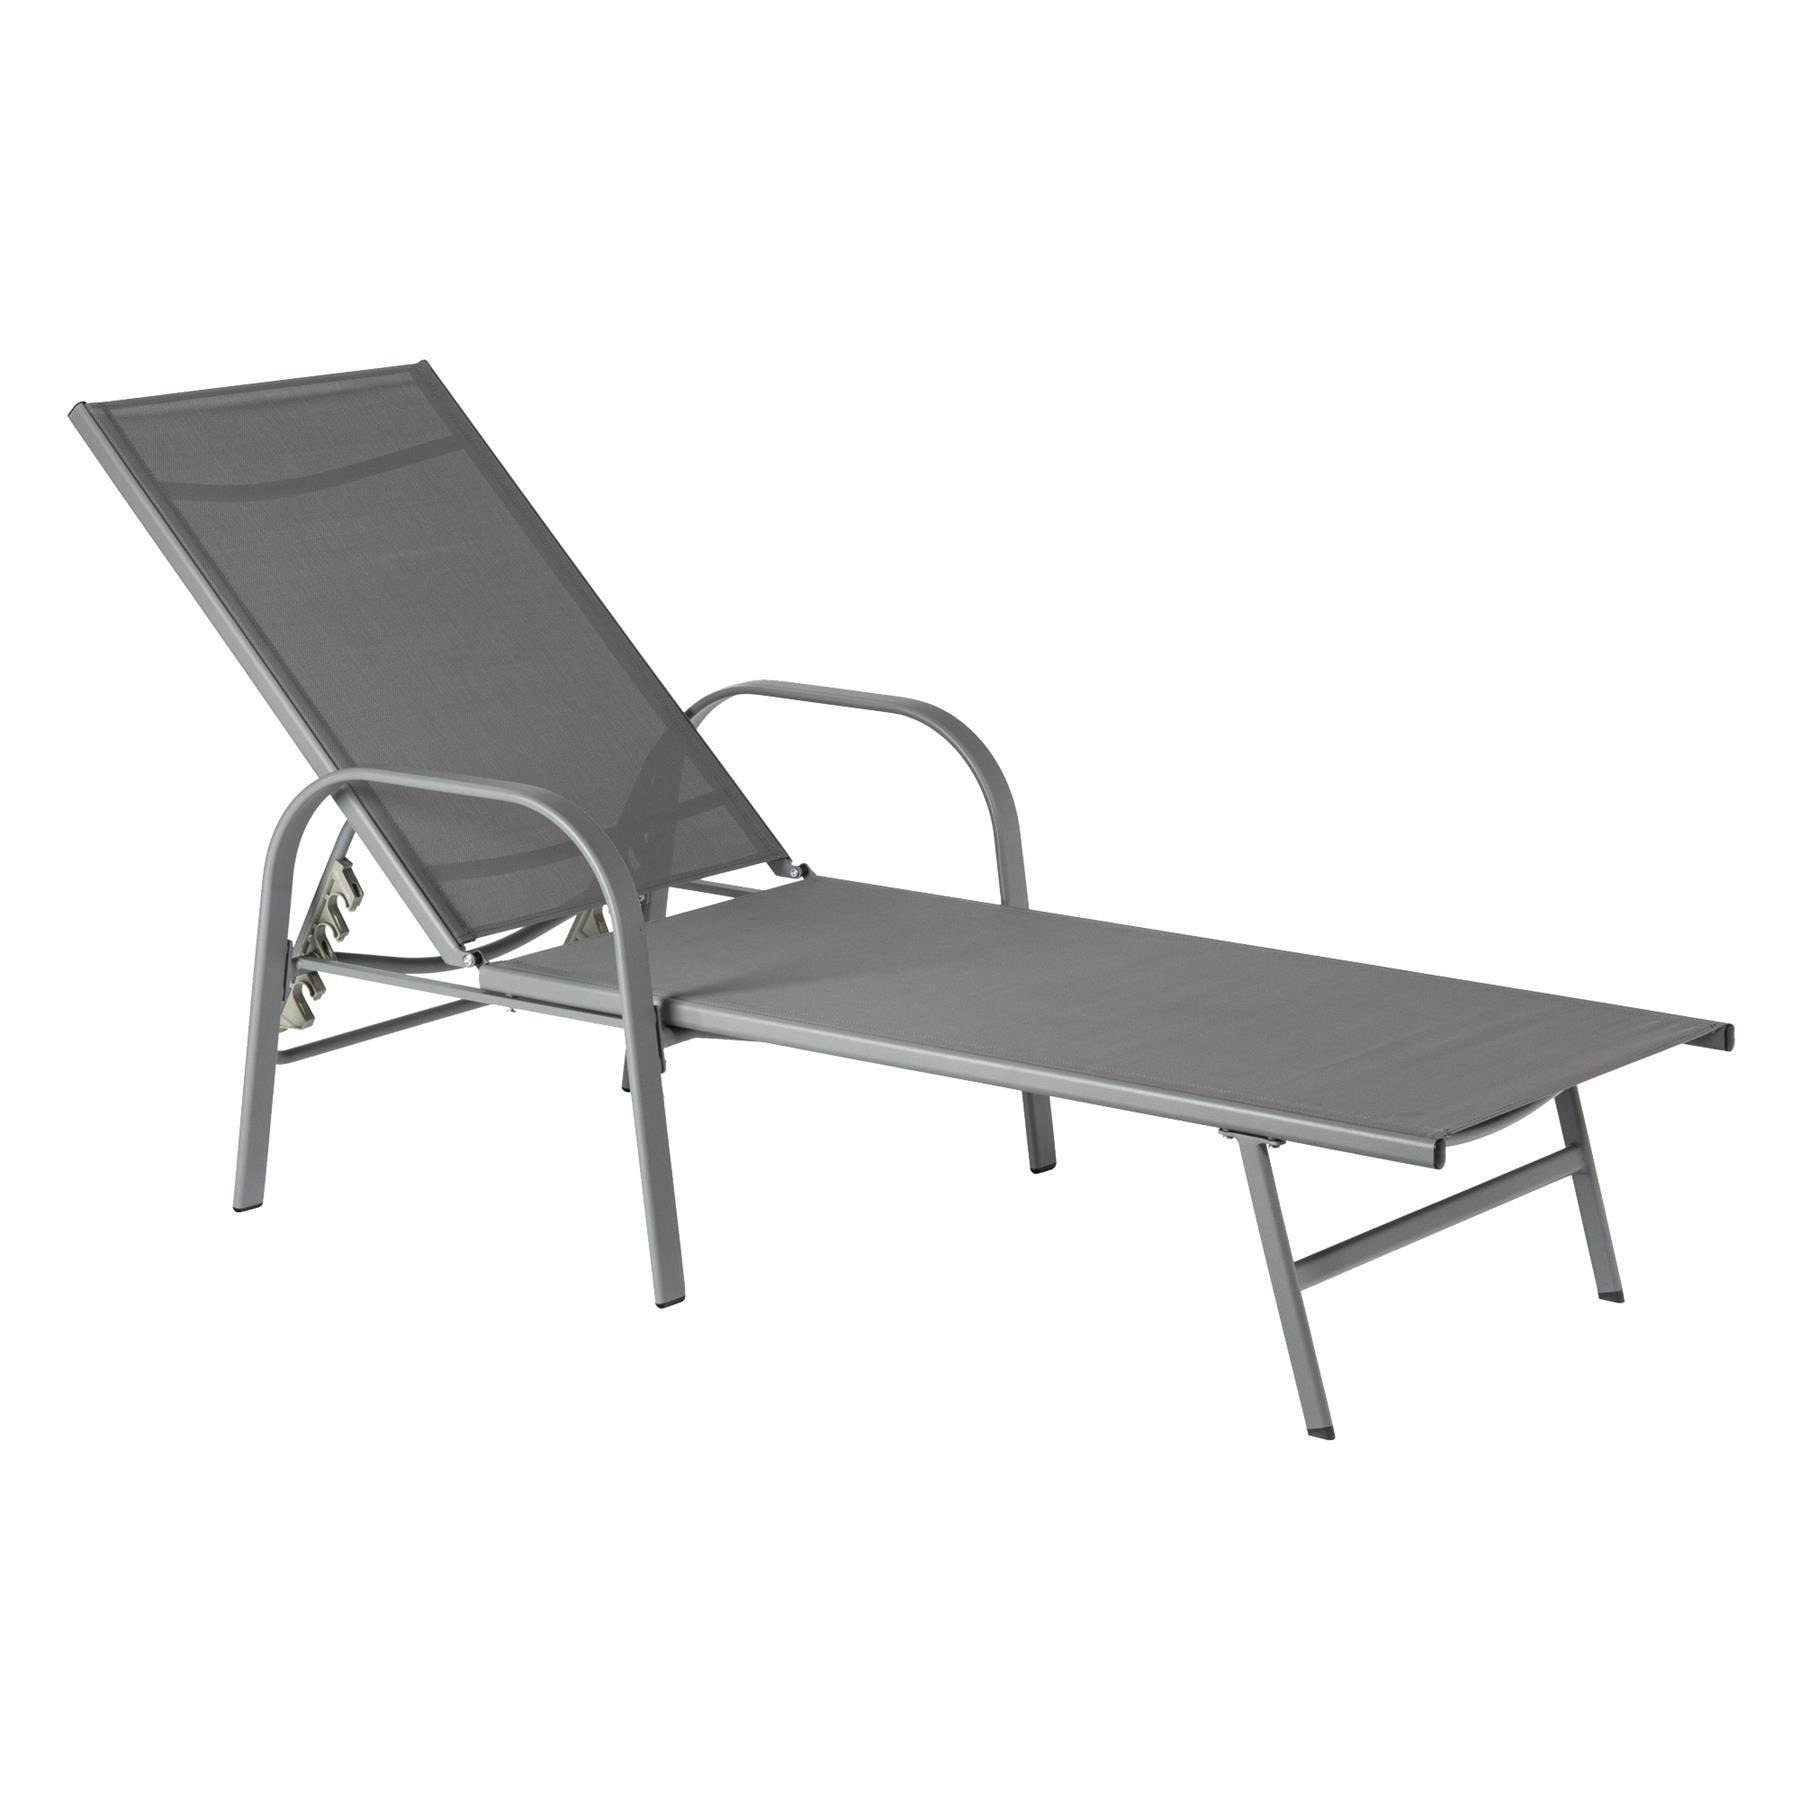 Sussex Garden Sun Lounger Bed - image 1